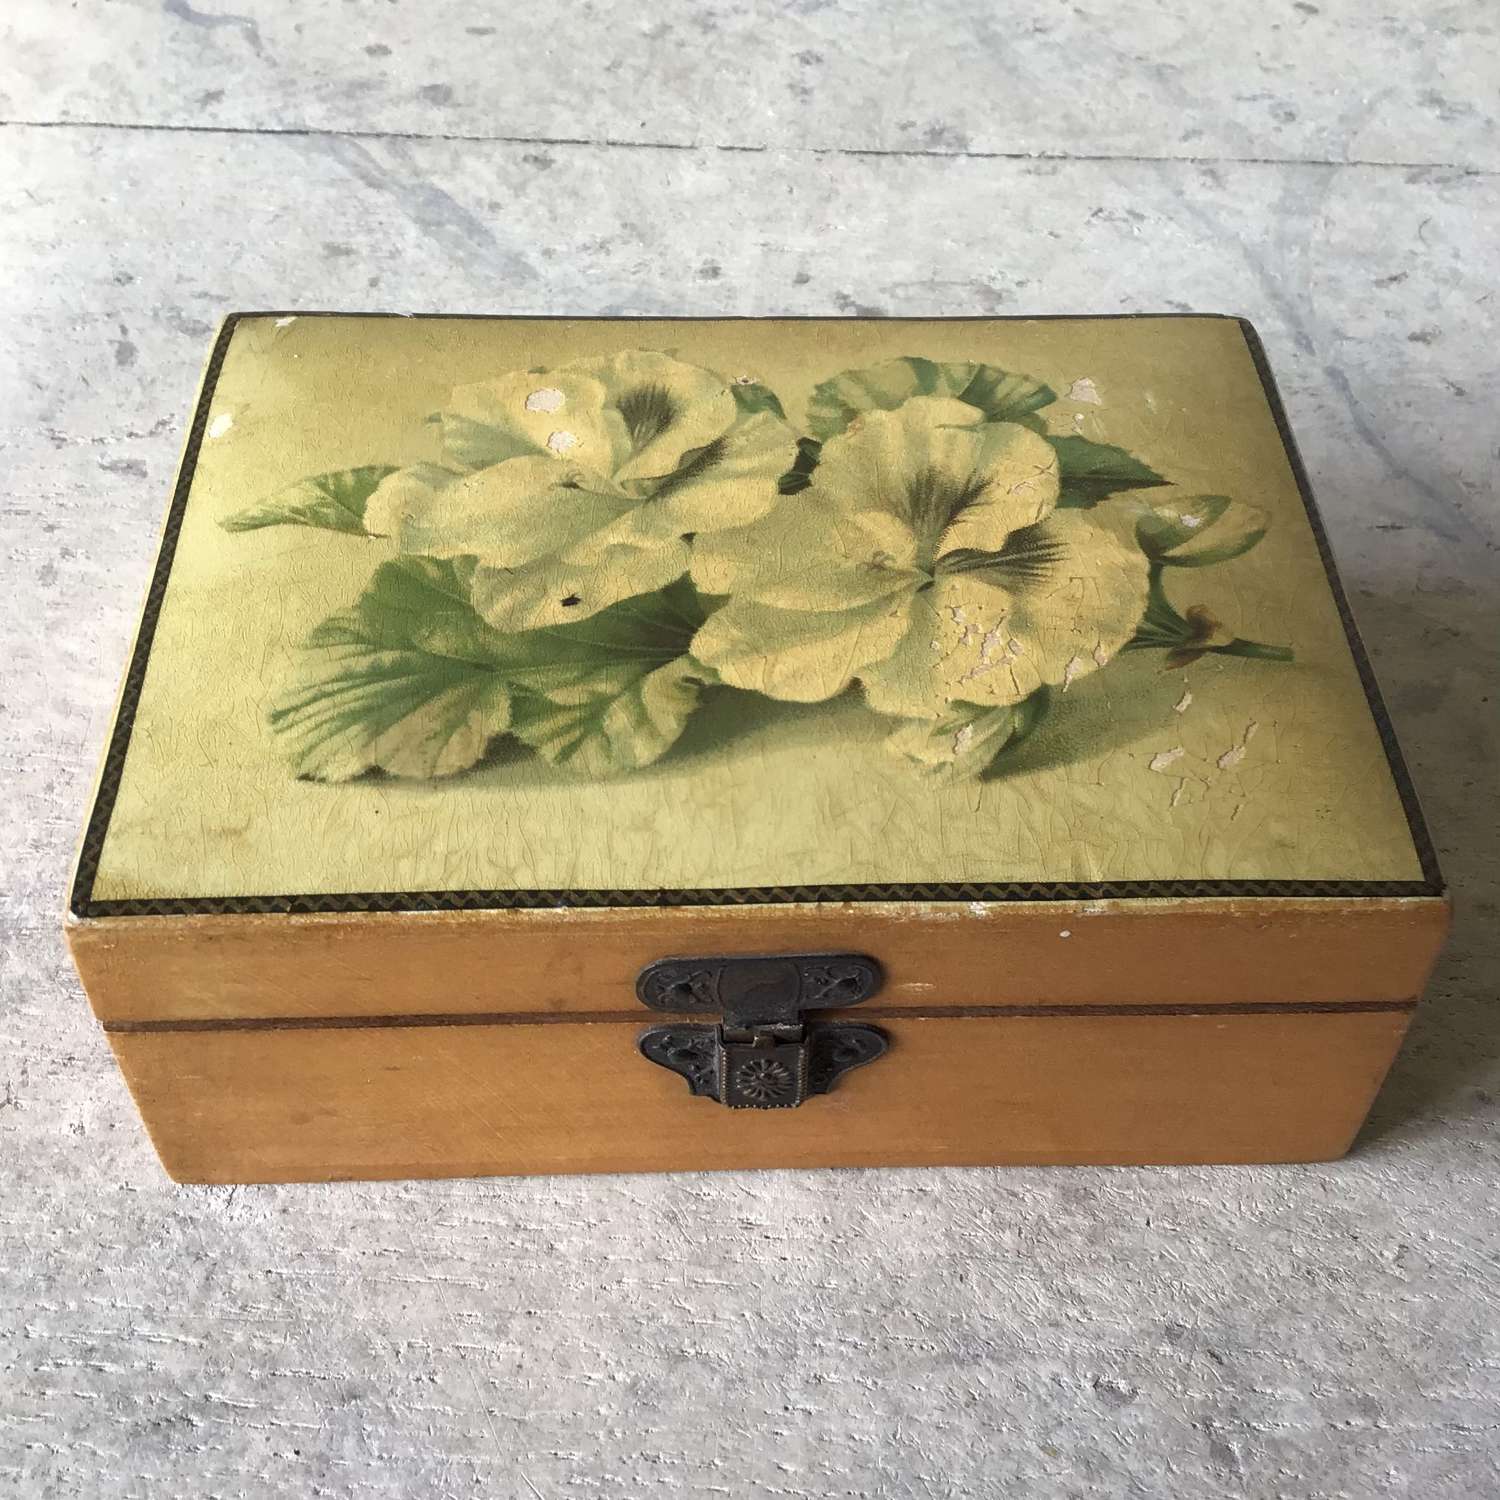 Vintage wooden box with flowers on top